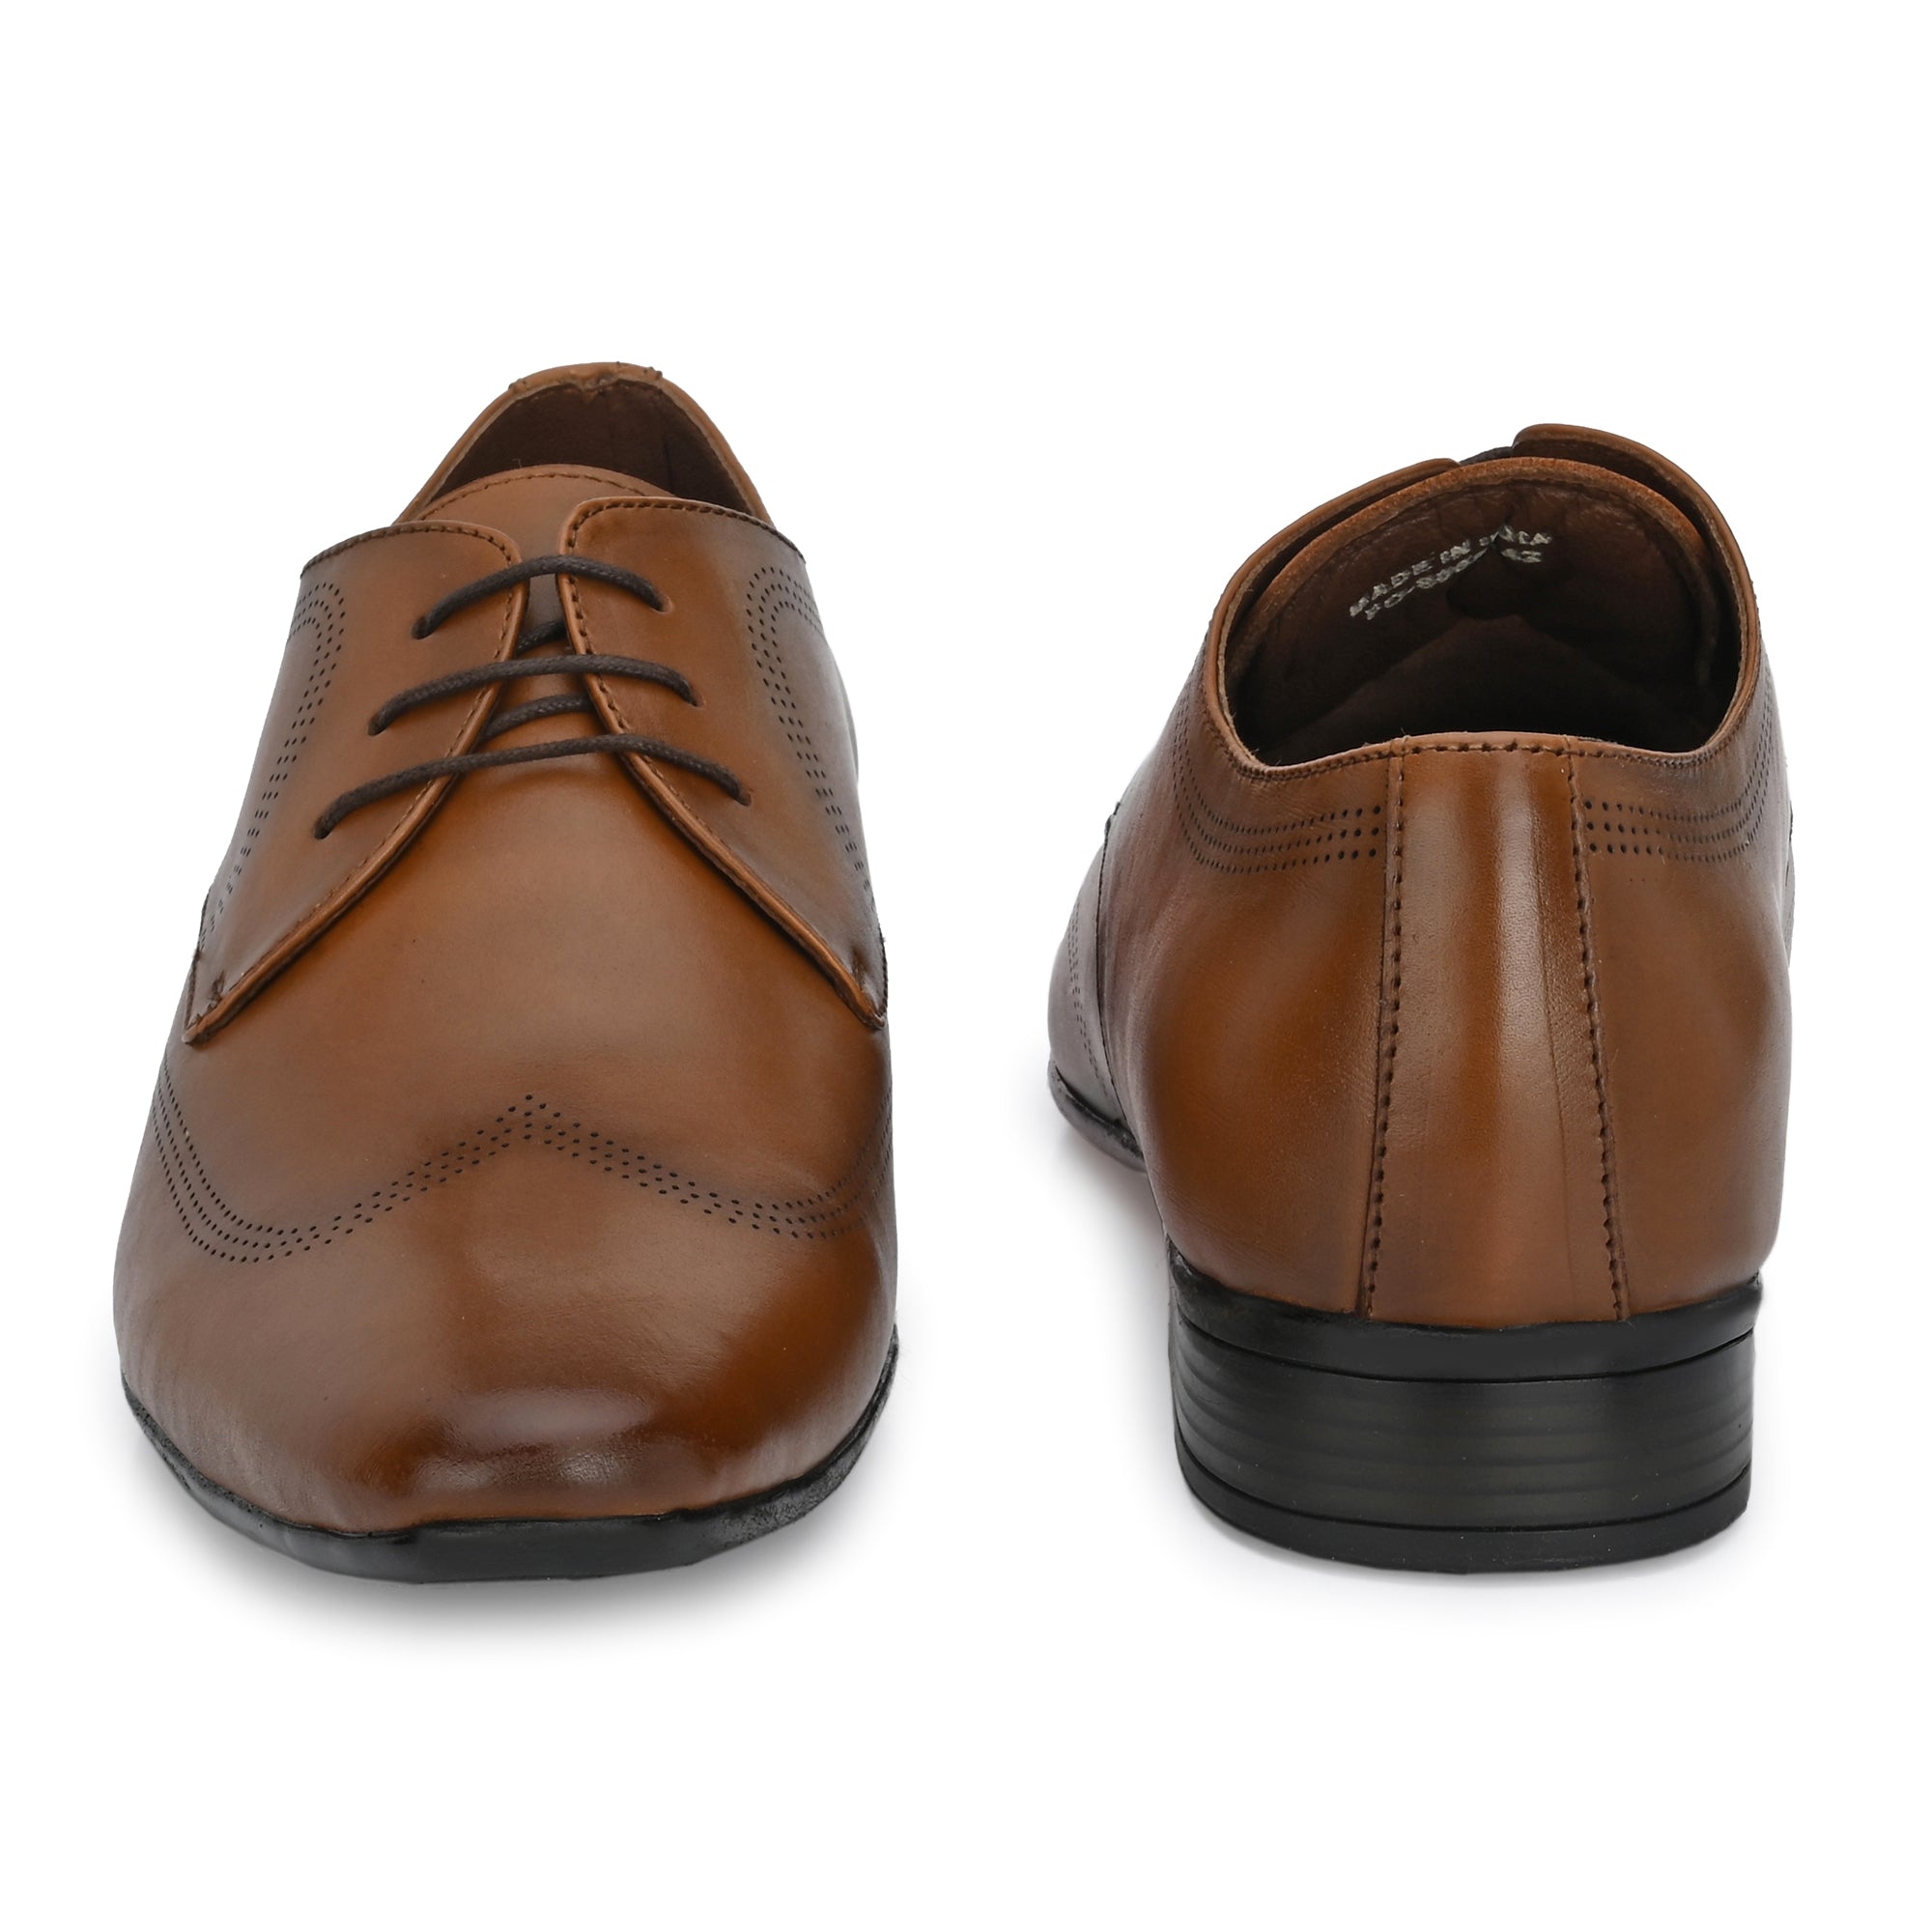 Egoss Luxury Formal Shoes Lace up For Men